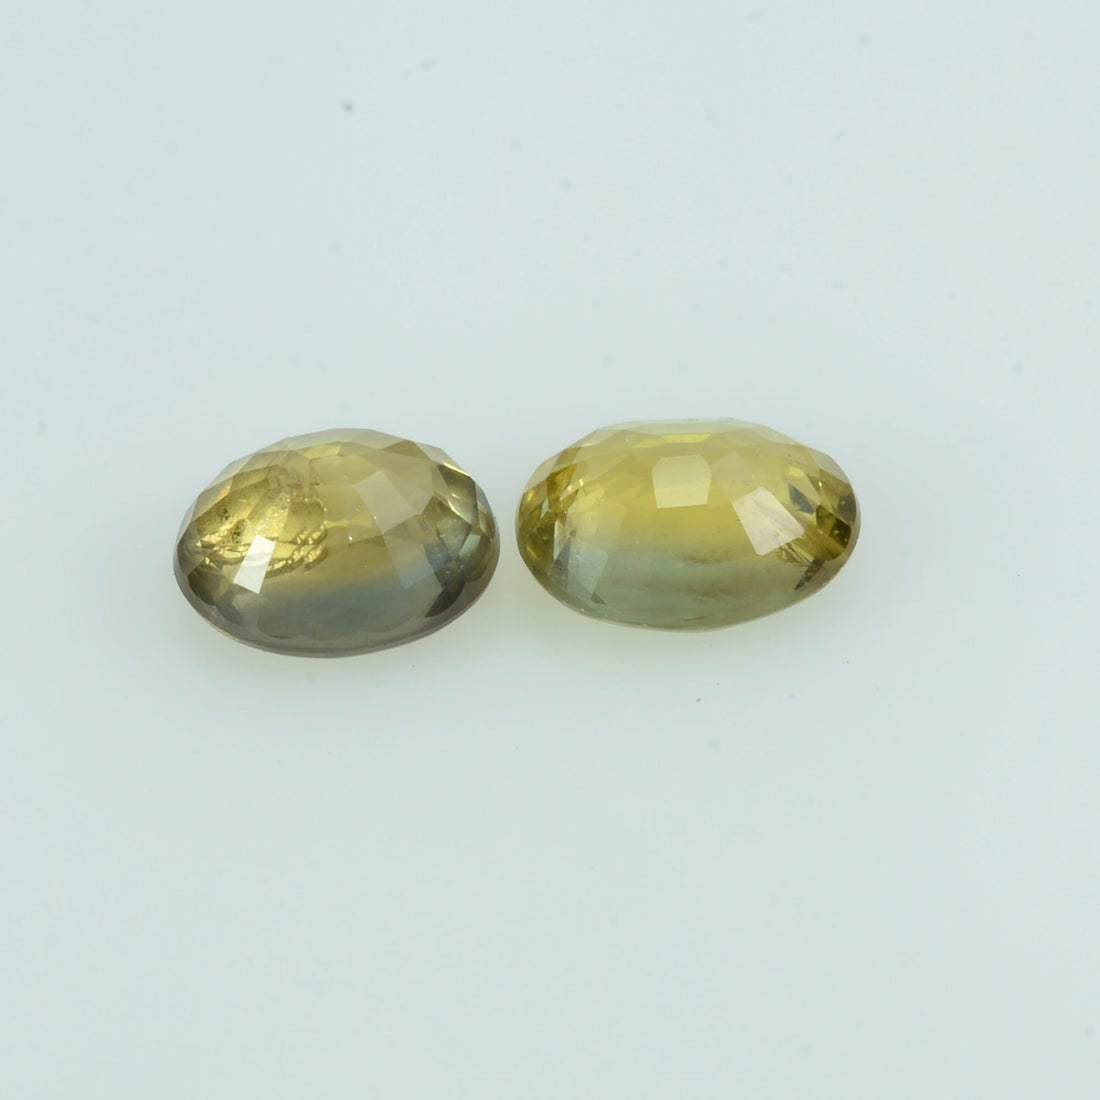 1.39 cts Natural Fancy Sapphire Loose Pair Gemstone Oval Cut